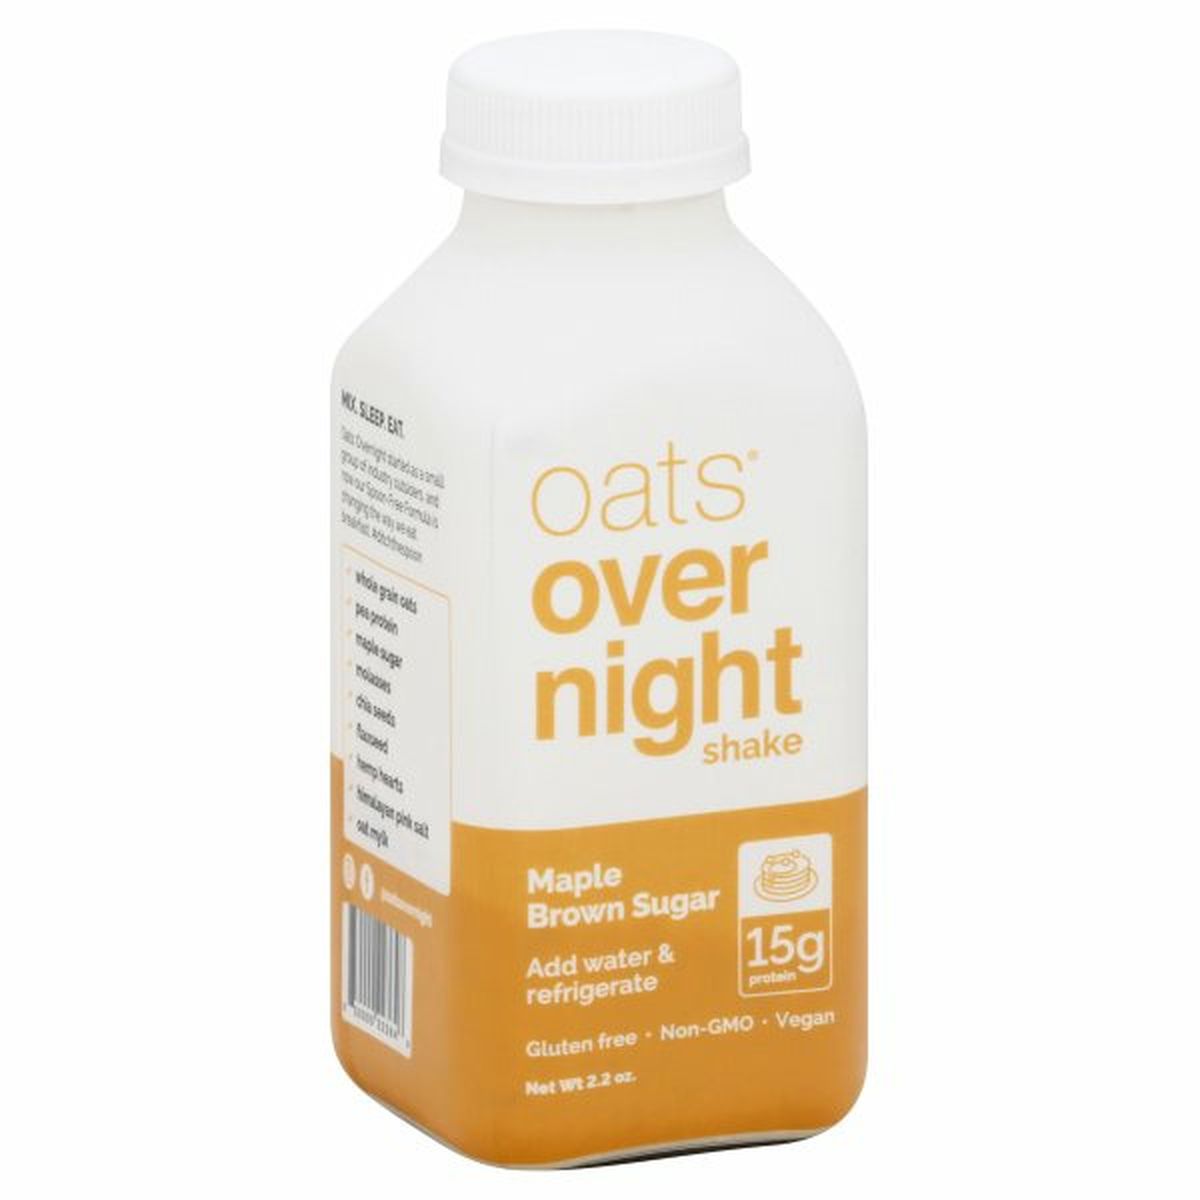 Calories in Oats Overnight Shake, Maple Brown Sugar